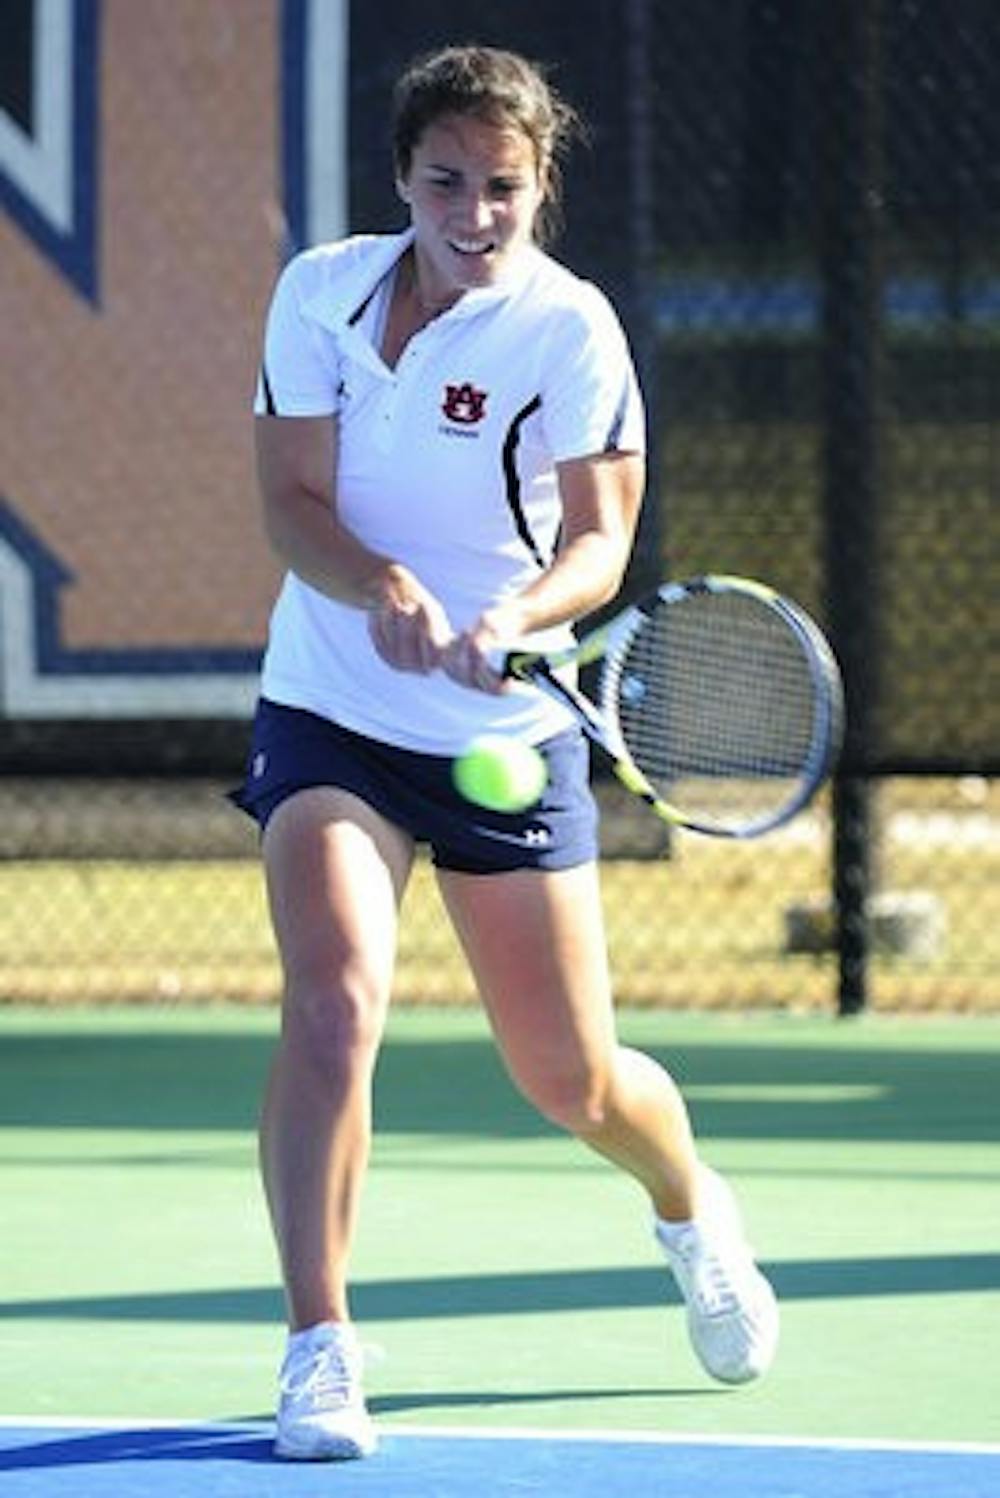 Plamena Kurteva moved from Bulgaria to Spain at age 14 and moved again to Auburn to play tennis. (Contributed by Media Relations)